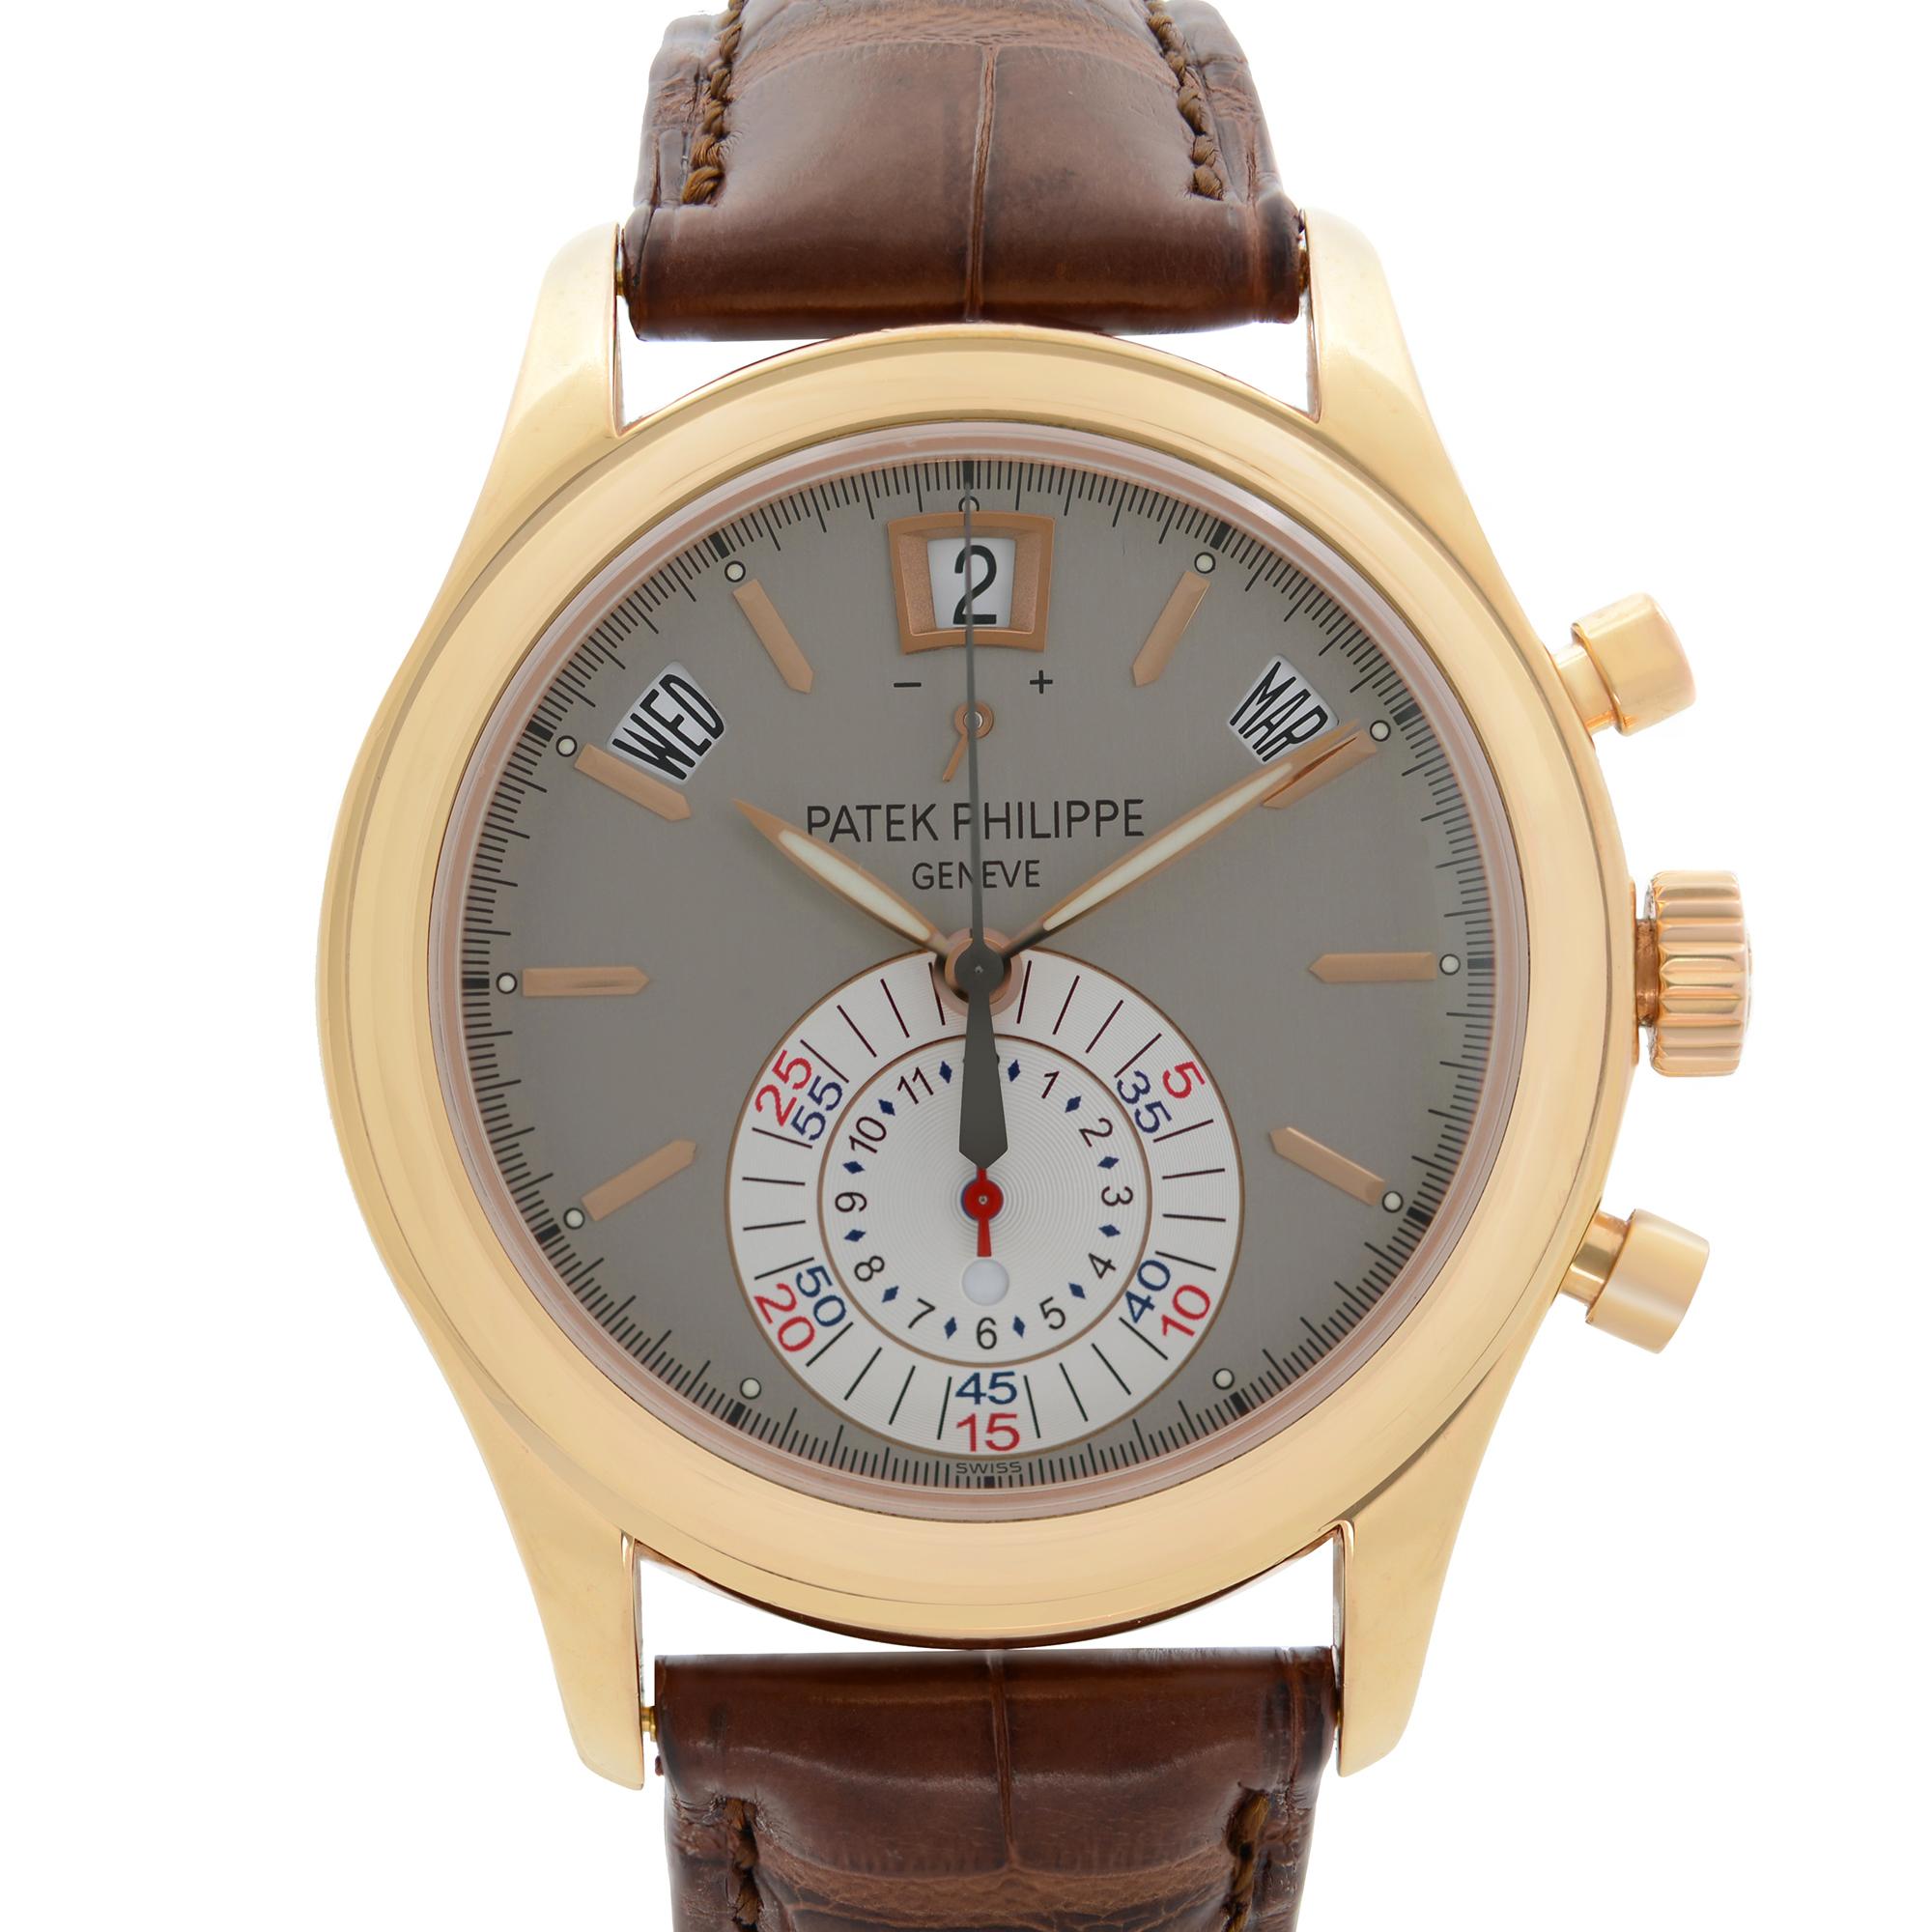 Pre-owned Patek Philippe Calatrava 18K Rose Gold Gray Dial Automatic Men's Watch 5960R-001.  Power reserve Indicator, Annual calendar, Deployant Buckle.  This Beautiful Timepiece Features: 18k Rose Gold Case With a Brown Leather Strap, Fixed 18k